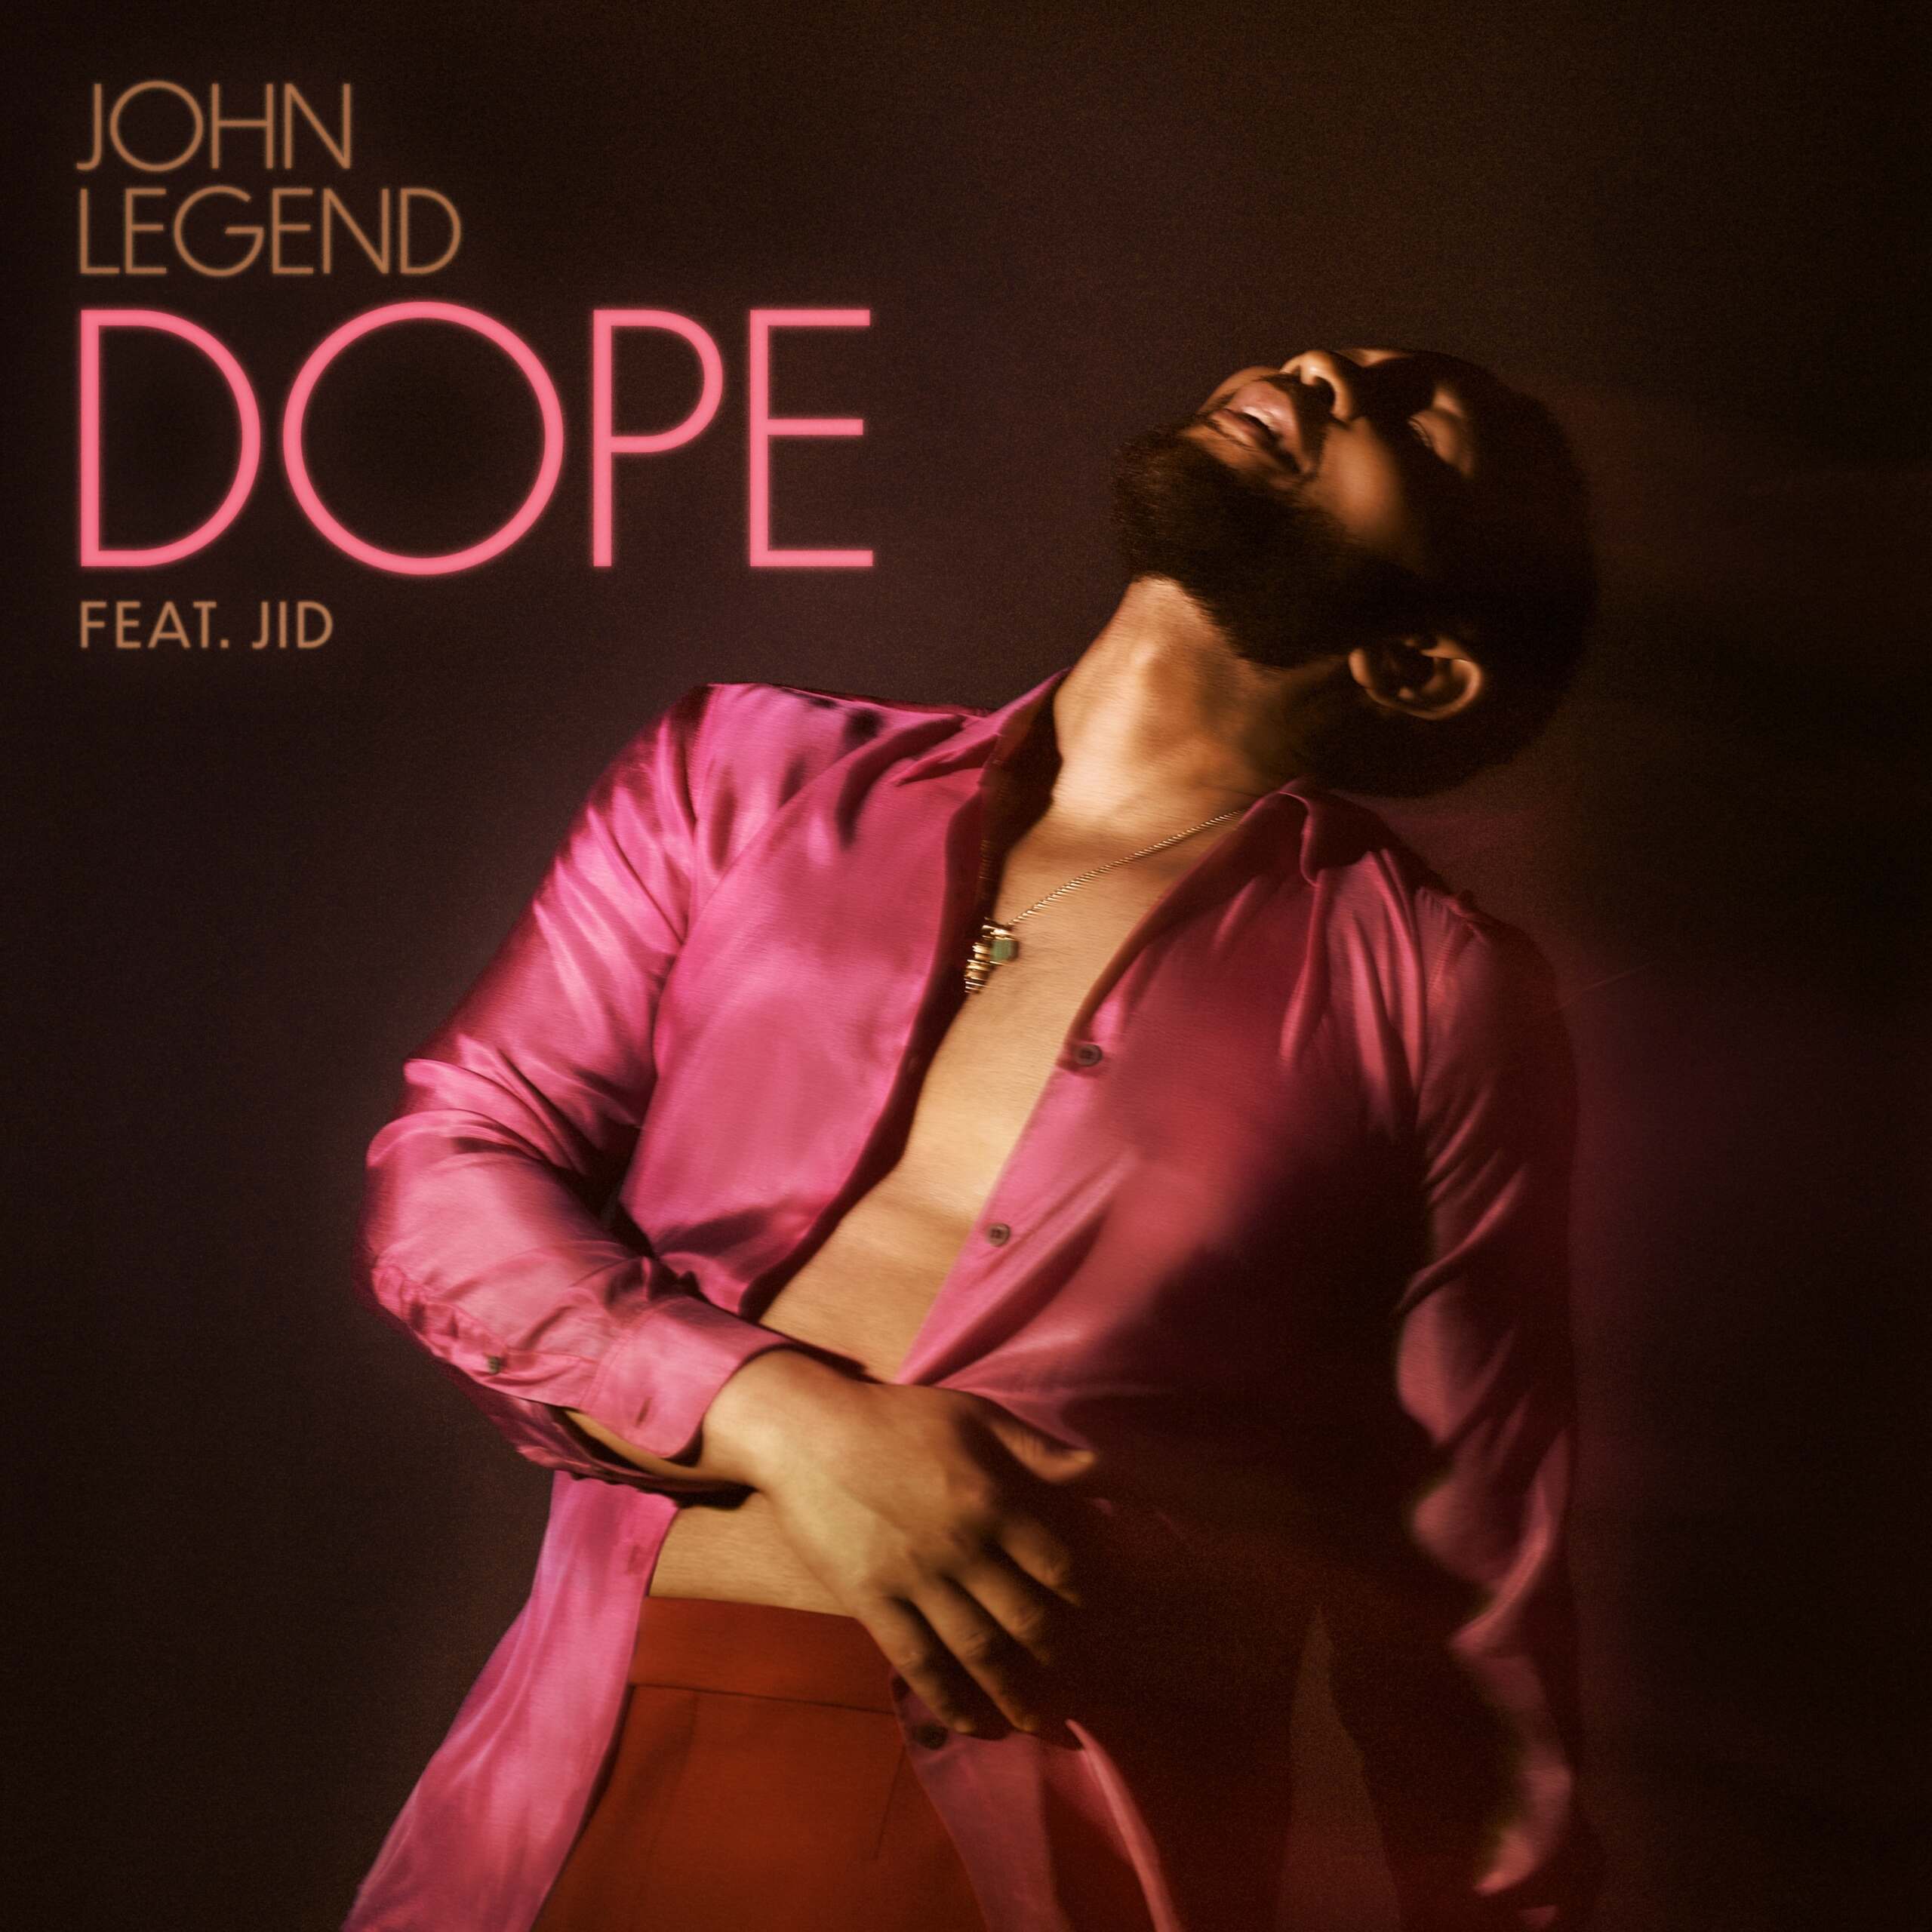 Watch The Lyric Video For John Legend's "Dope" feat. JID